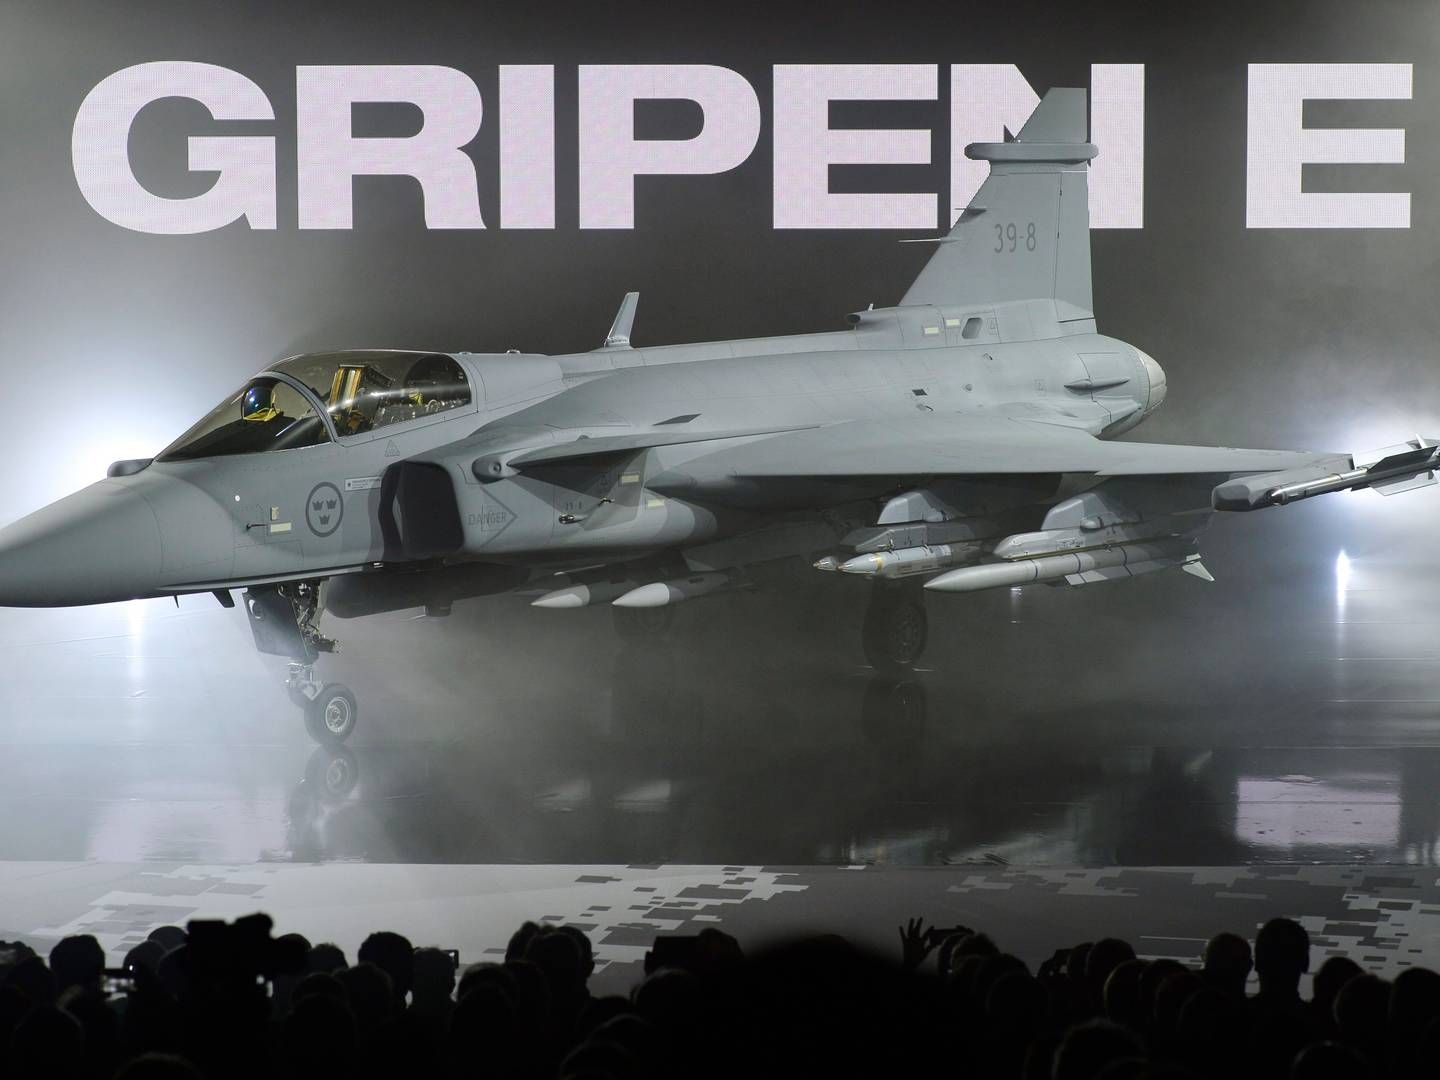 The new E version of the Swedish JAS 39 Gripen multi role fighter being rolled out at SAAB in Linkoping, Sweden. | Photo: Anders Wiklund/AP/Ritzau Scanpix